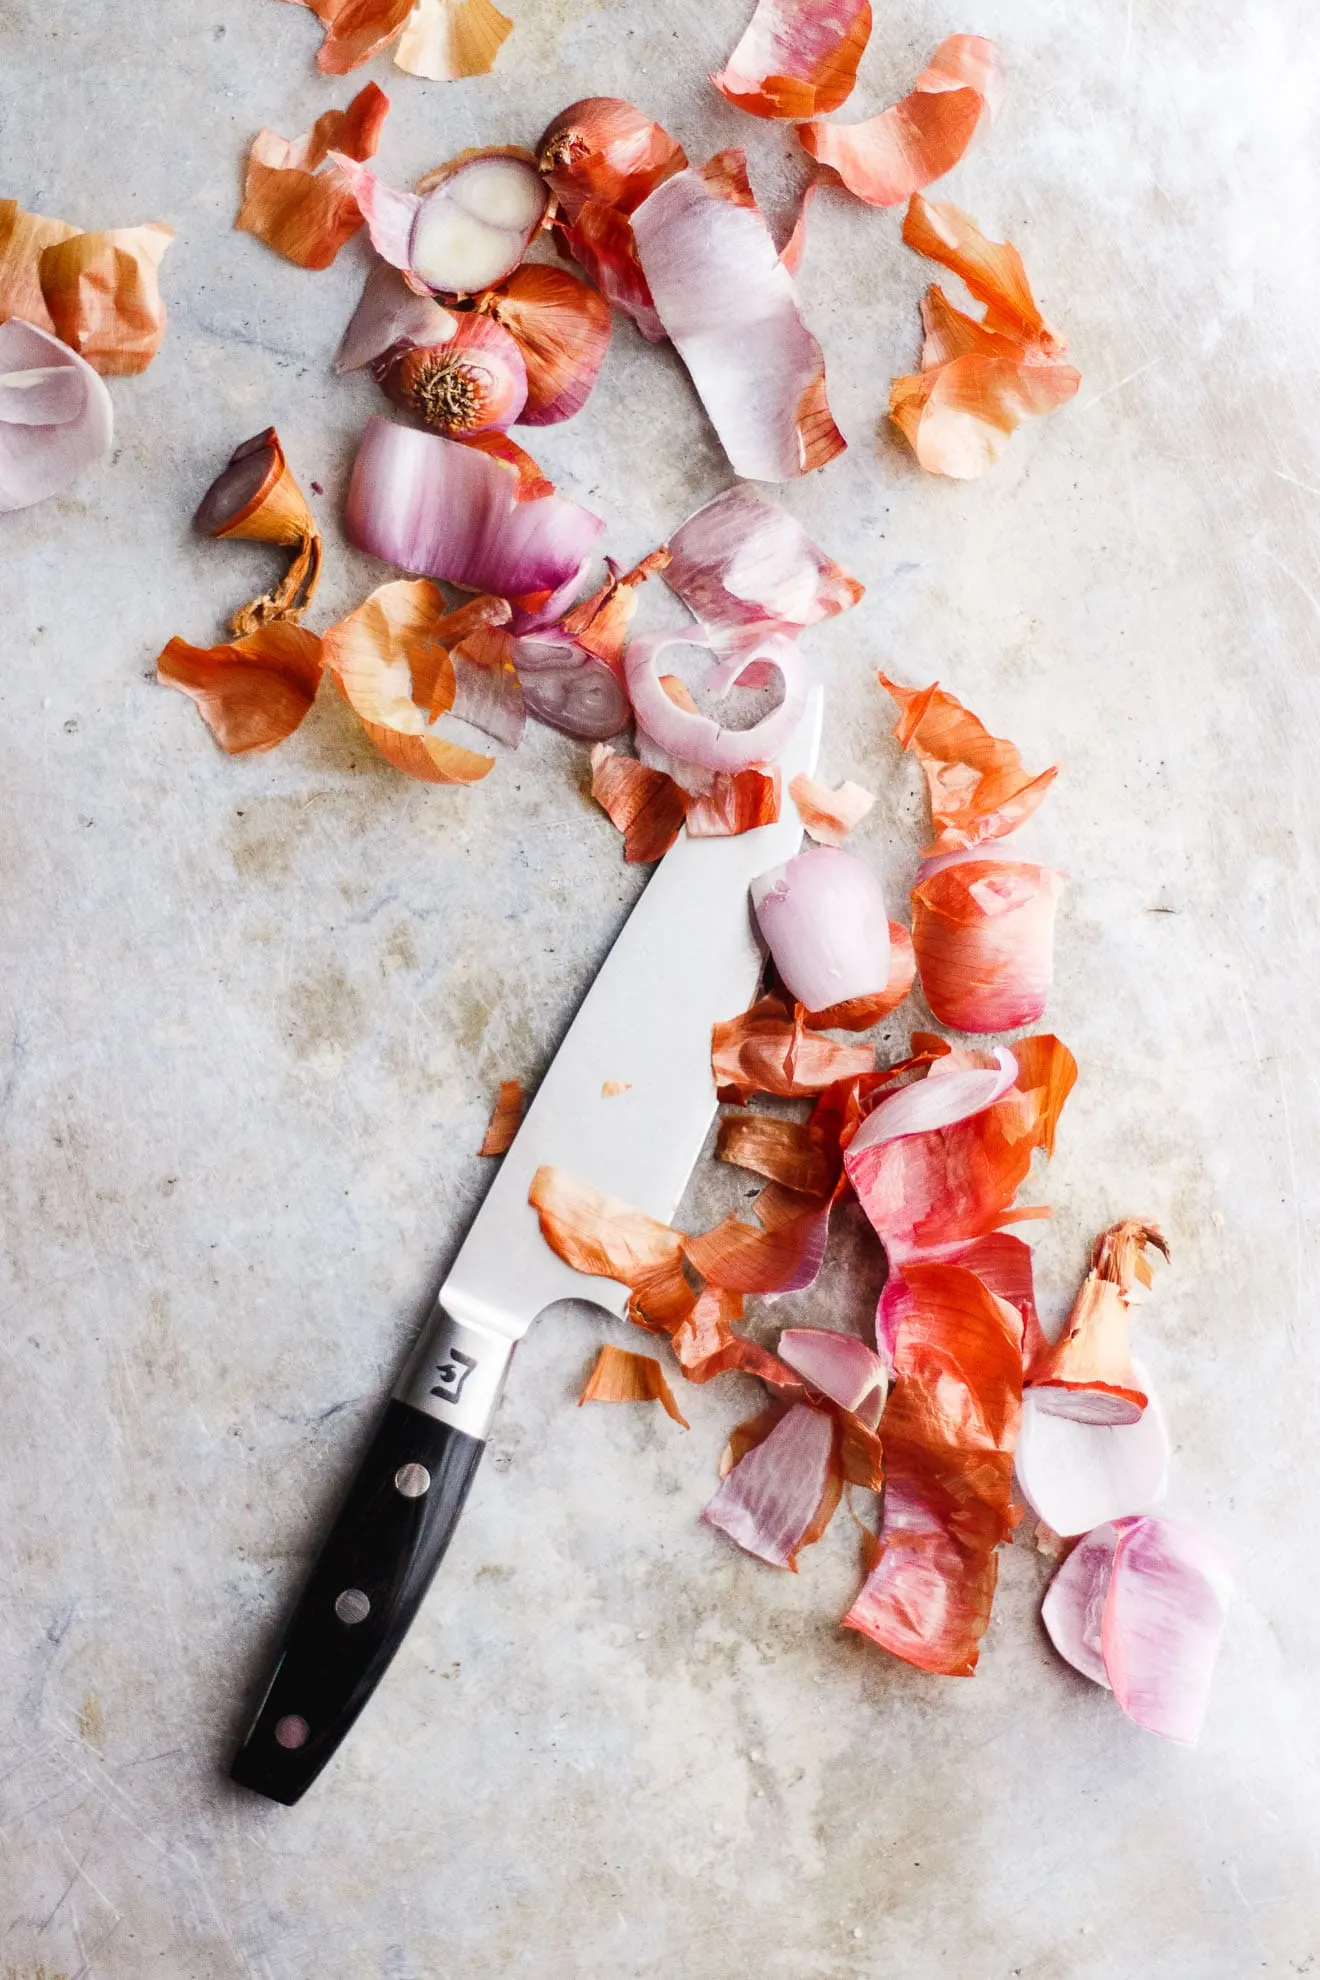 shallots with a knife